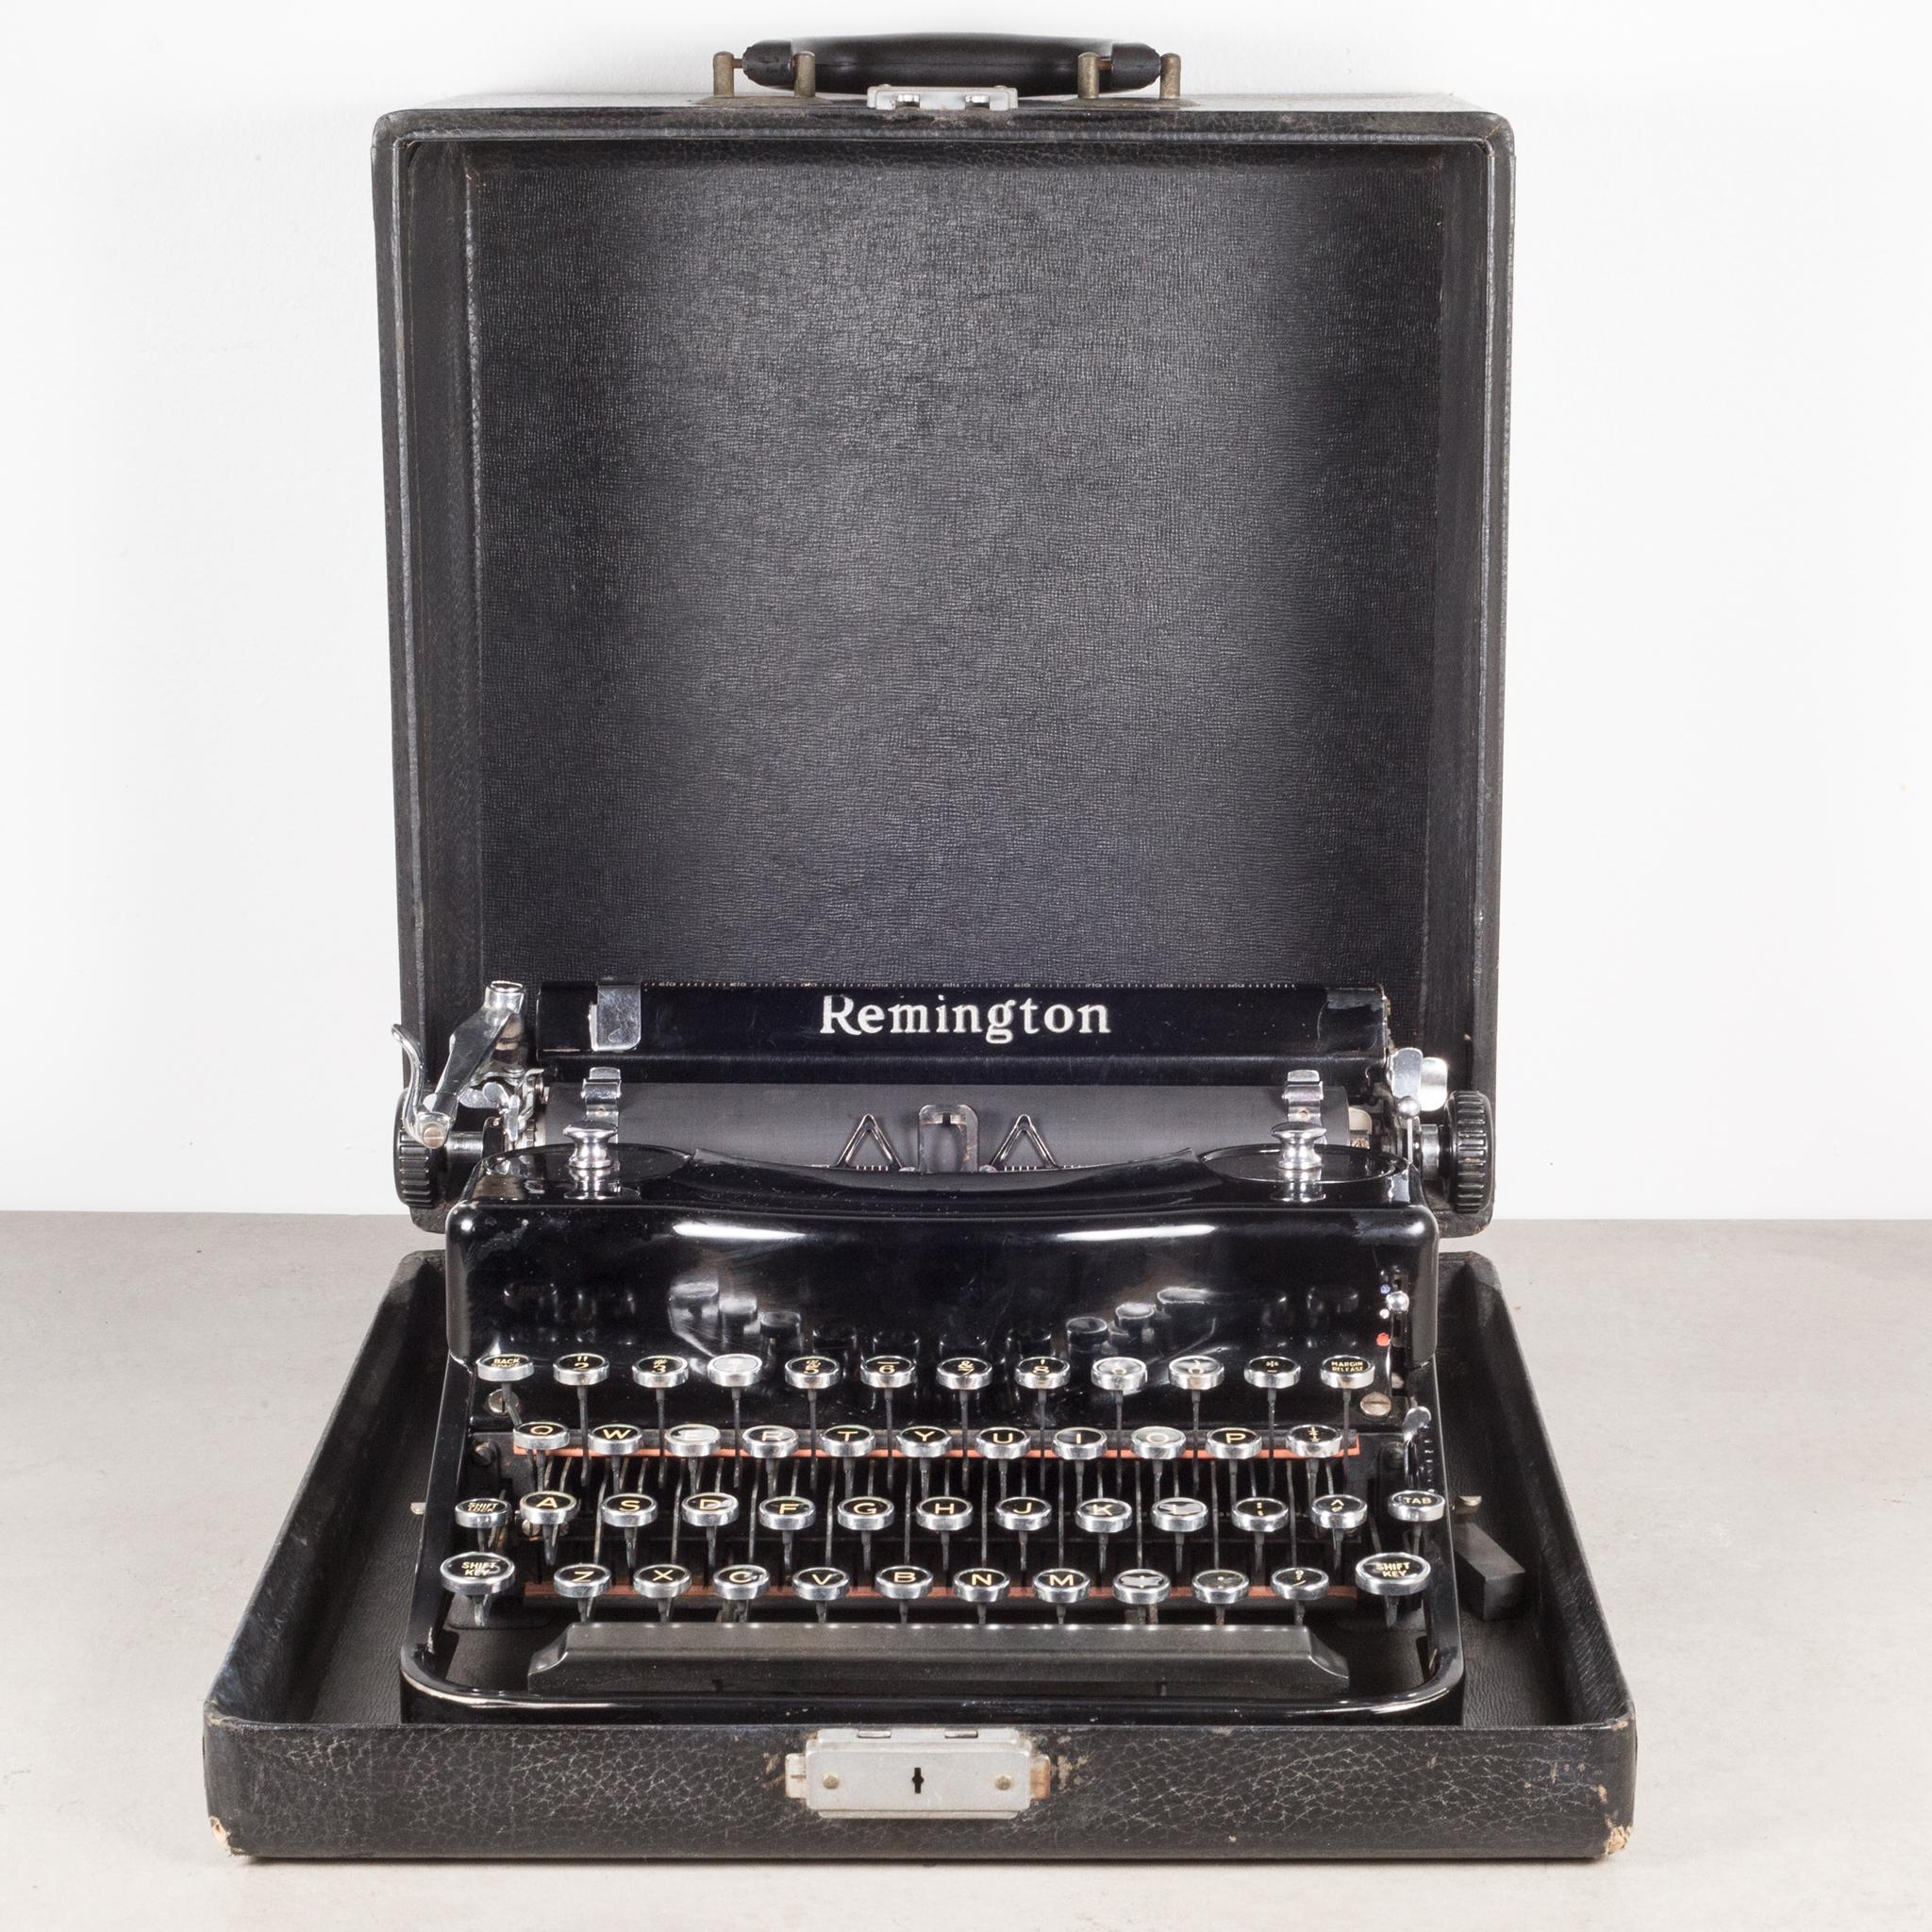 About

A fully refurbished Remington Model 1 Typewriter in high gloss black finish with chrome handles to spool the ribbon and original case. The keys nickel with white letters on a black background. This typewriter is very clean and has been